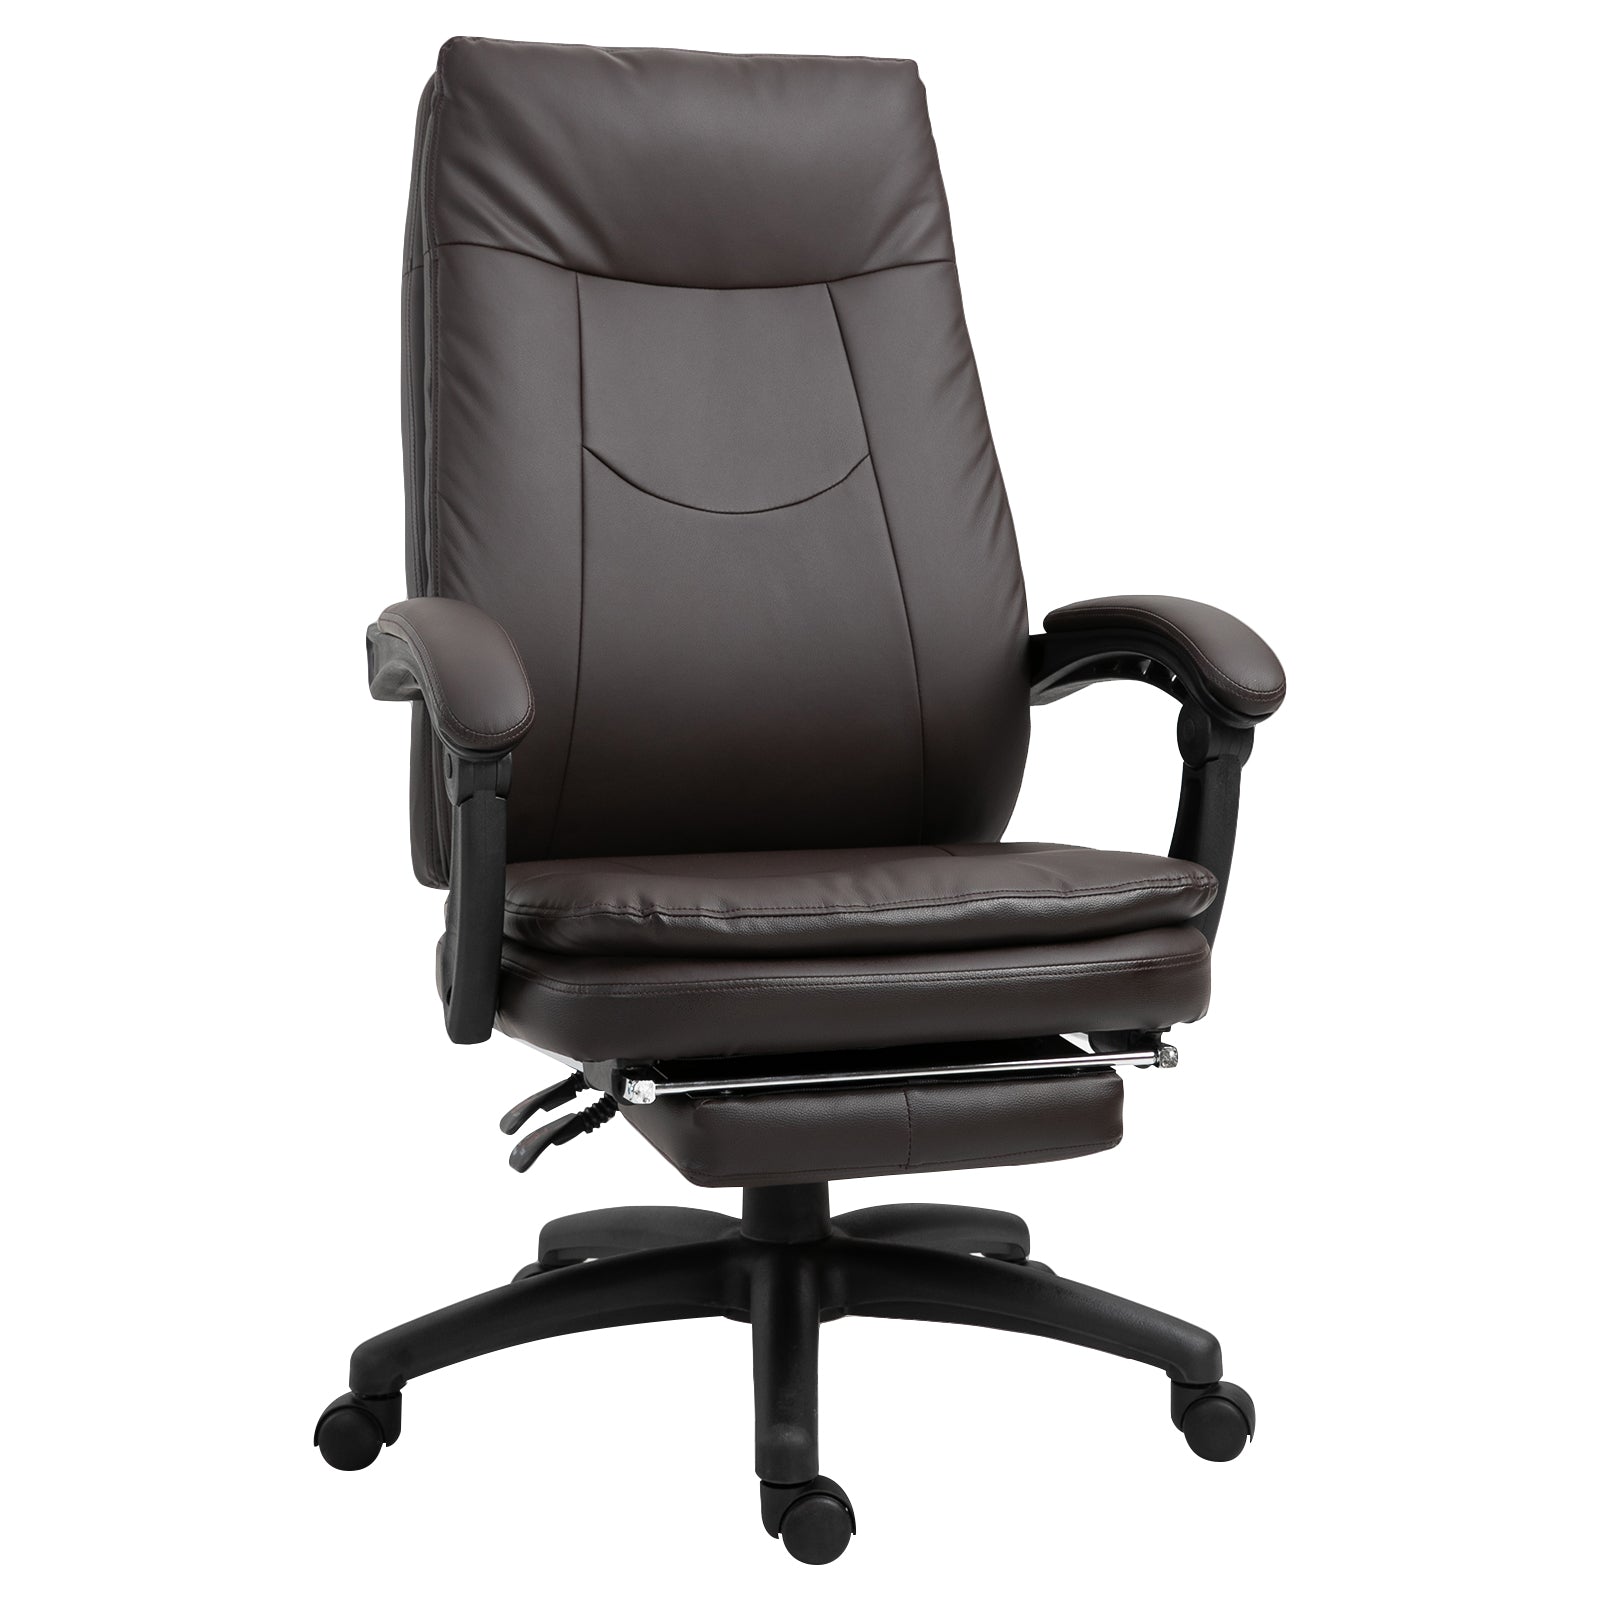 Nancy's Anaconda Office chair - Gaming chair - Executive chair - Upholstered - Brown - Ergonomic - Adjustable